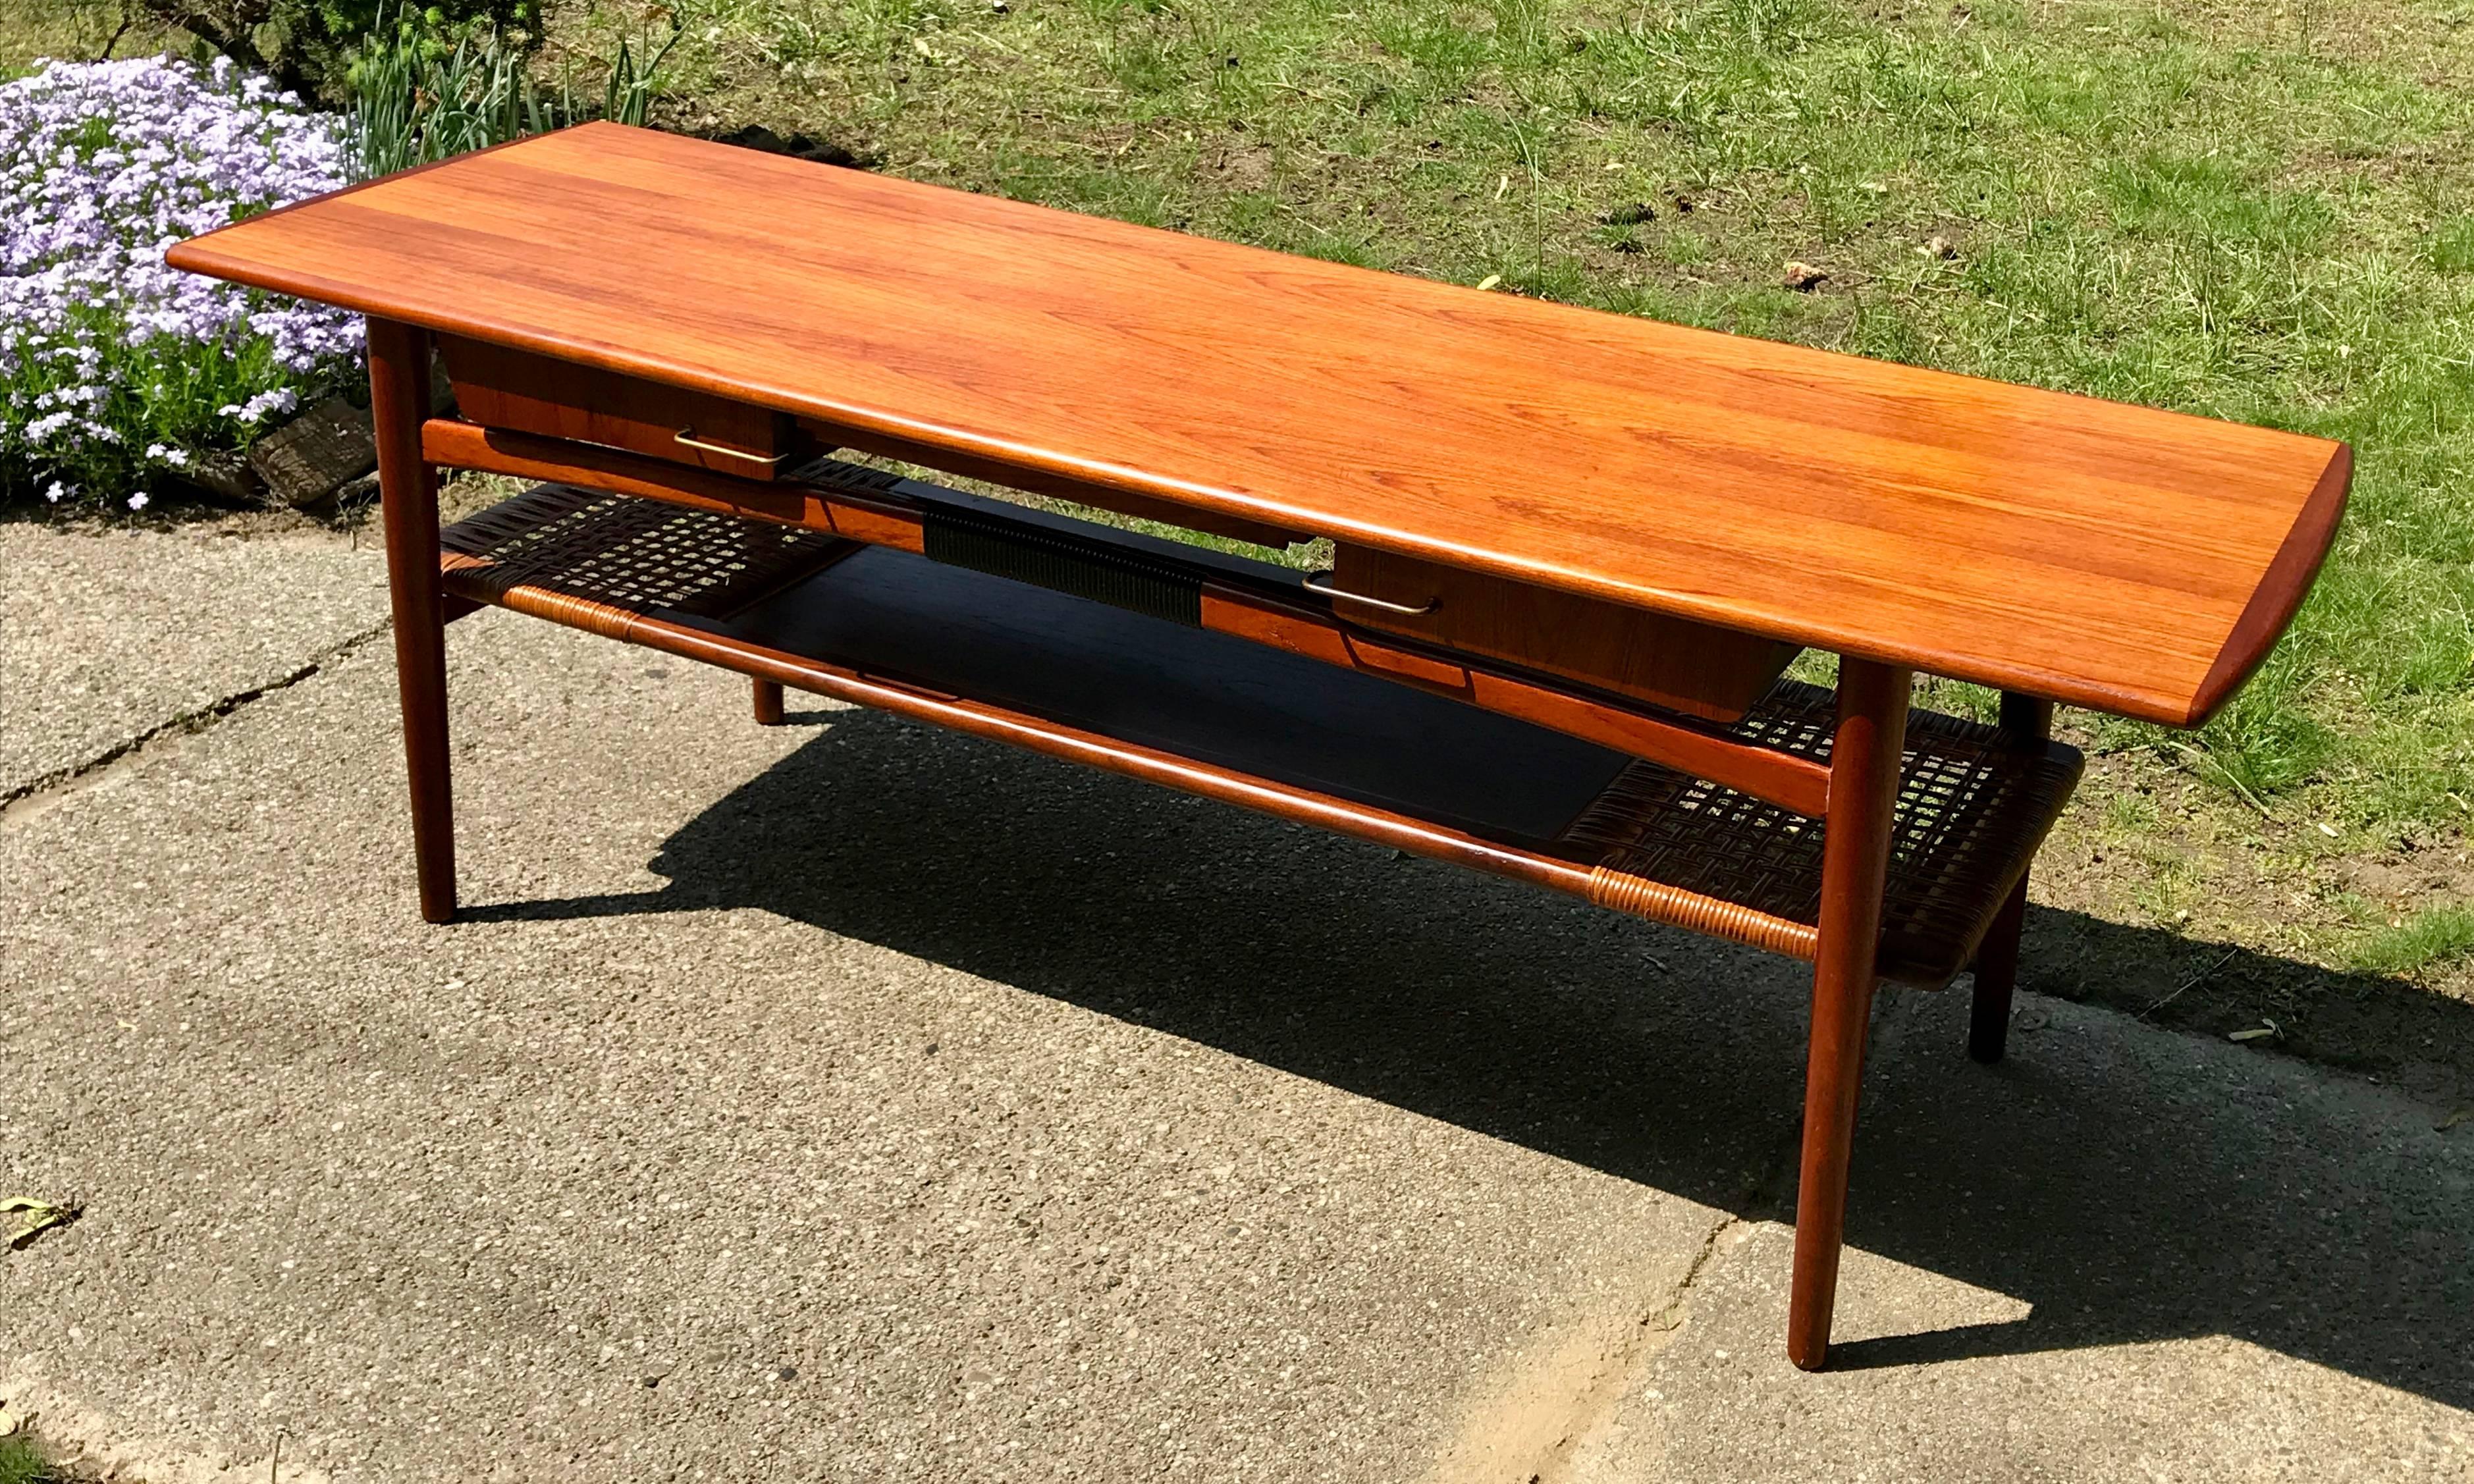 Very stylish teak coffee table with pull-out laminate cocktail shelf along with four side drawers and woven cane bottom shelf, Denmark, 1960s. All original, professionally cleaned, small loss of cane though very minor, please see photos.